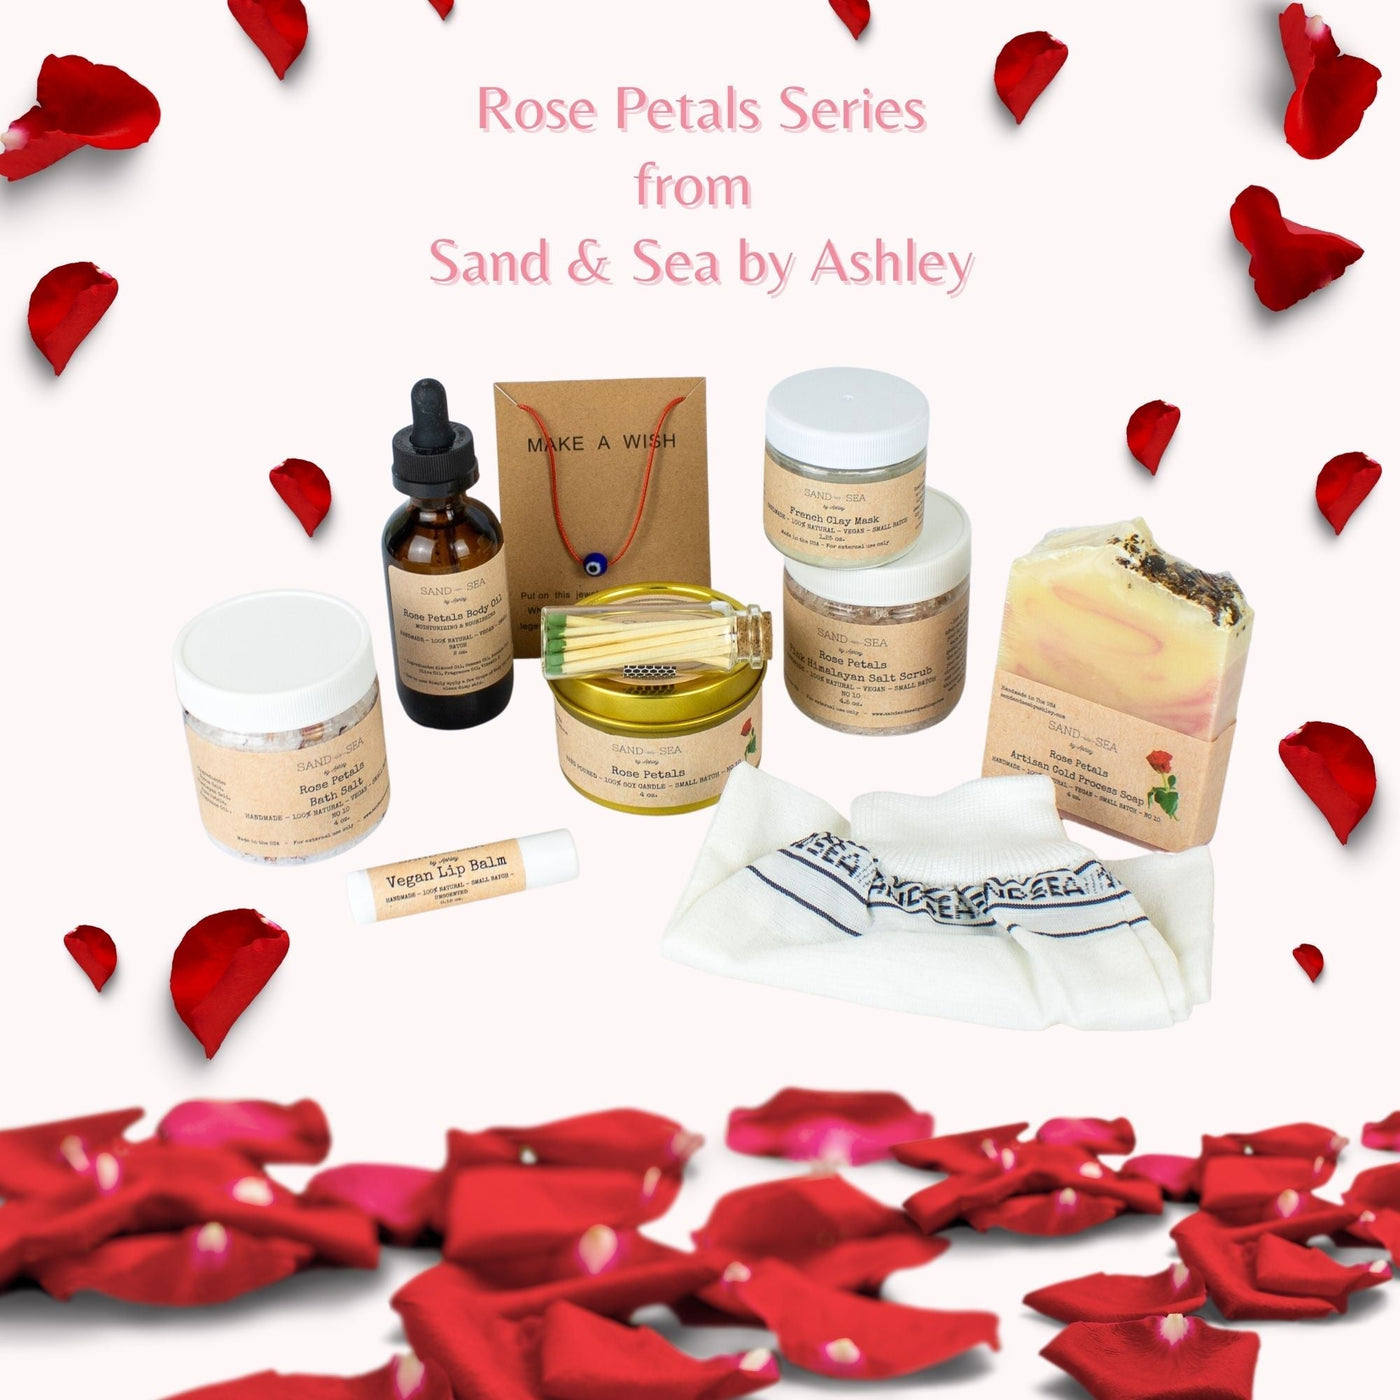 Christmas Holiday Gift Baskets - Handmade Rose Petals Spa Gift Set with Turkish Towel 13 pieces - Sand & Sea by Ashley